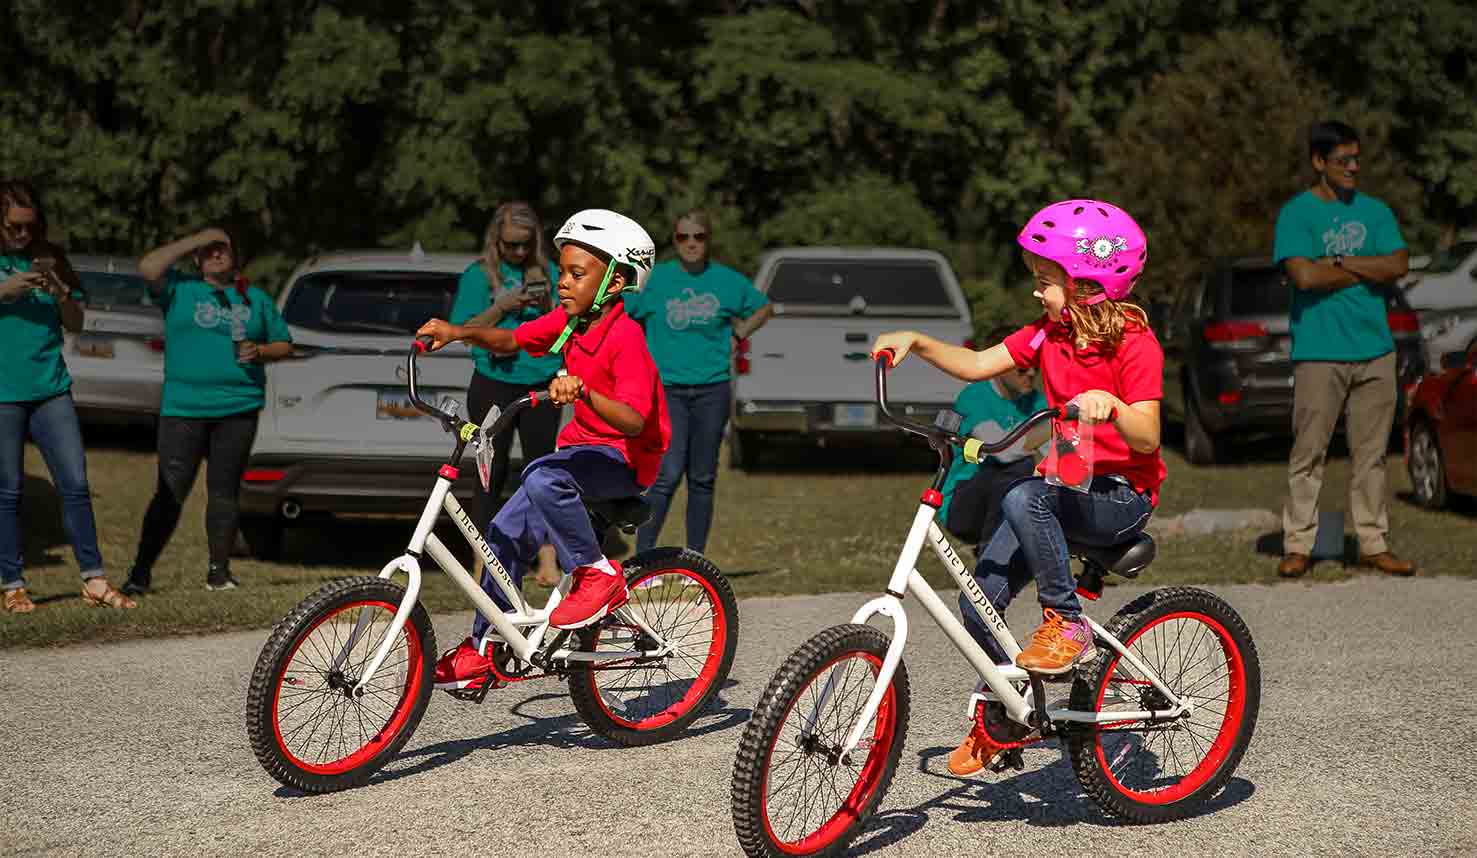 Featured image for “Fathom and Going Places Nonprofit Surprised Students With Free Custom Bikes”